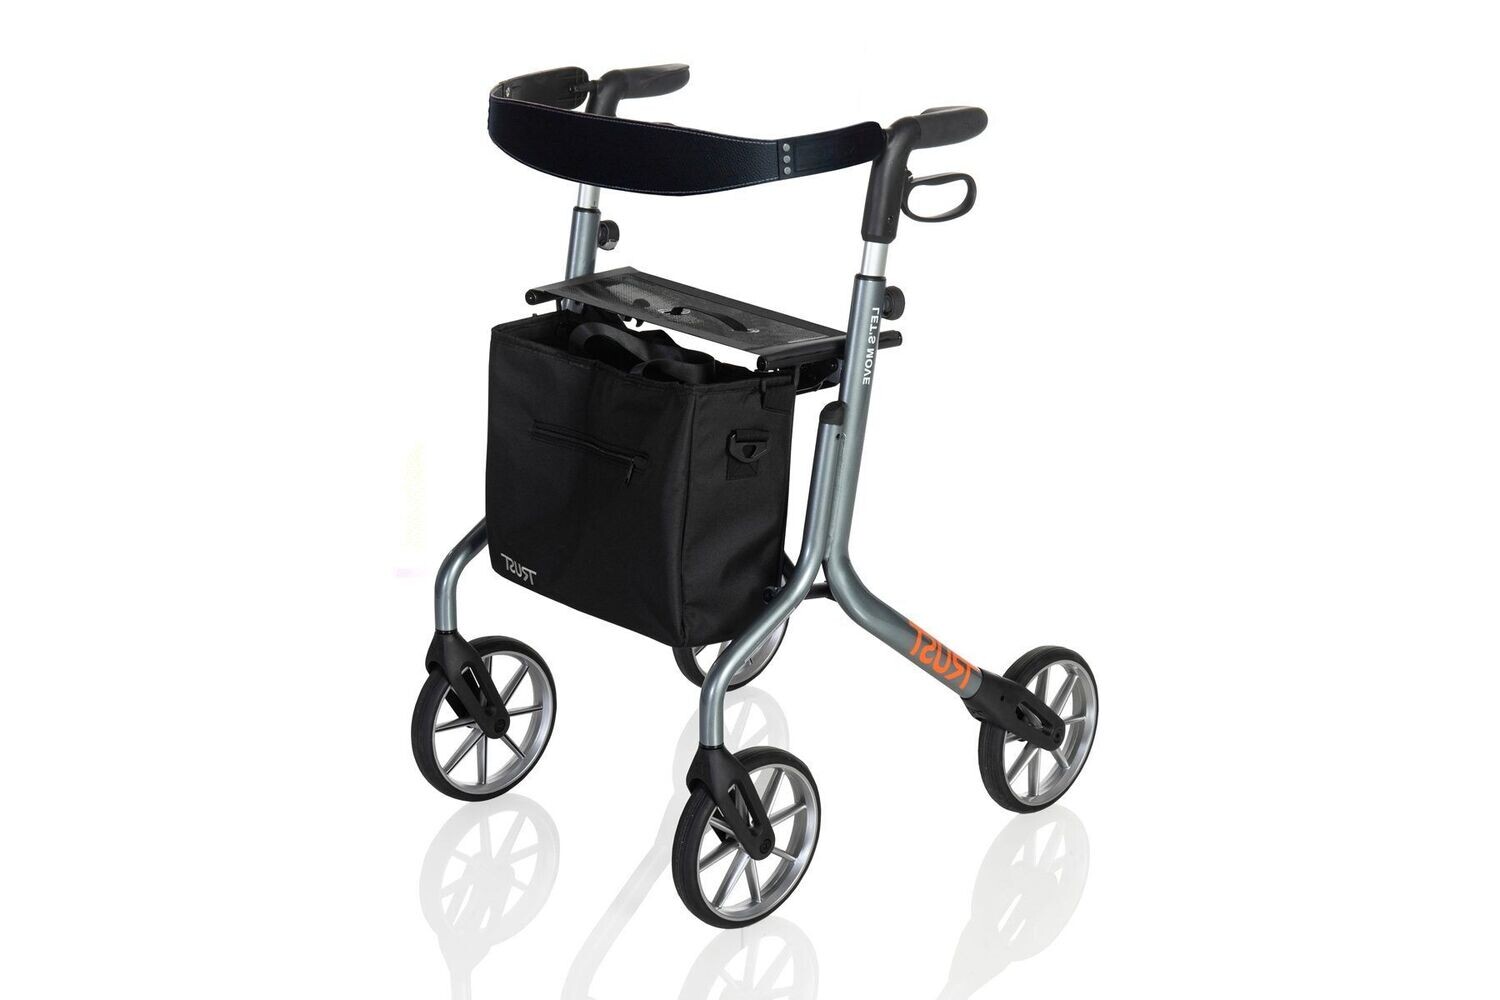 Let’s Move Rollator